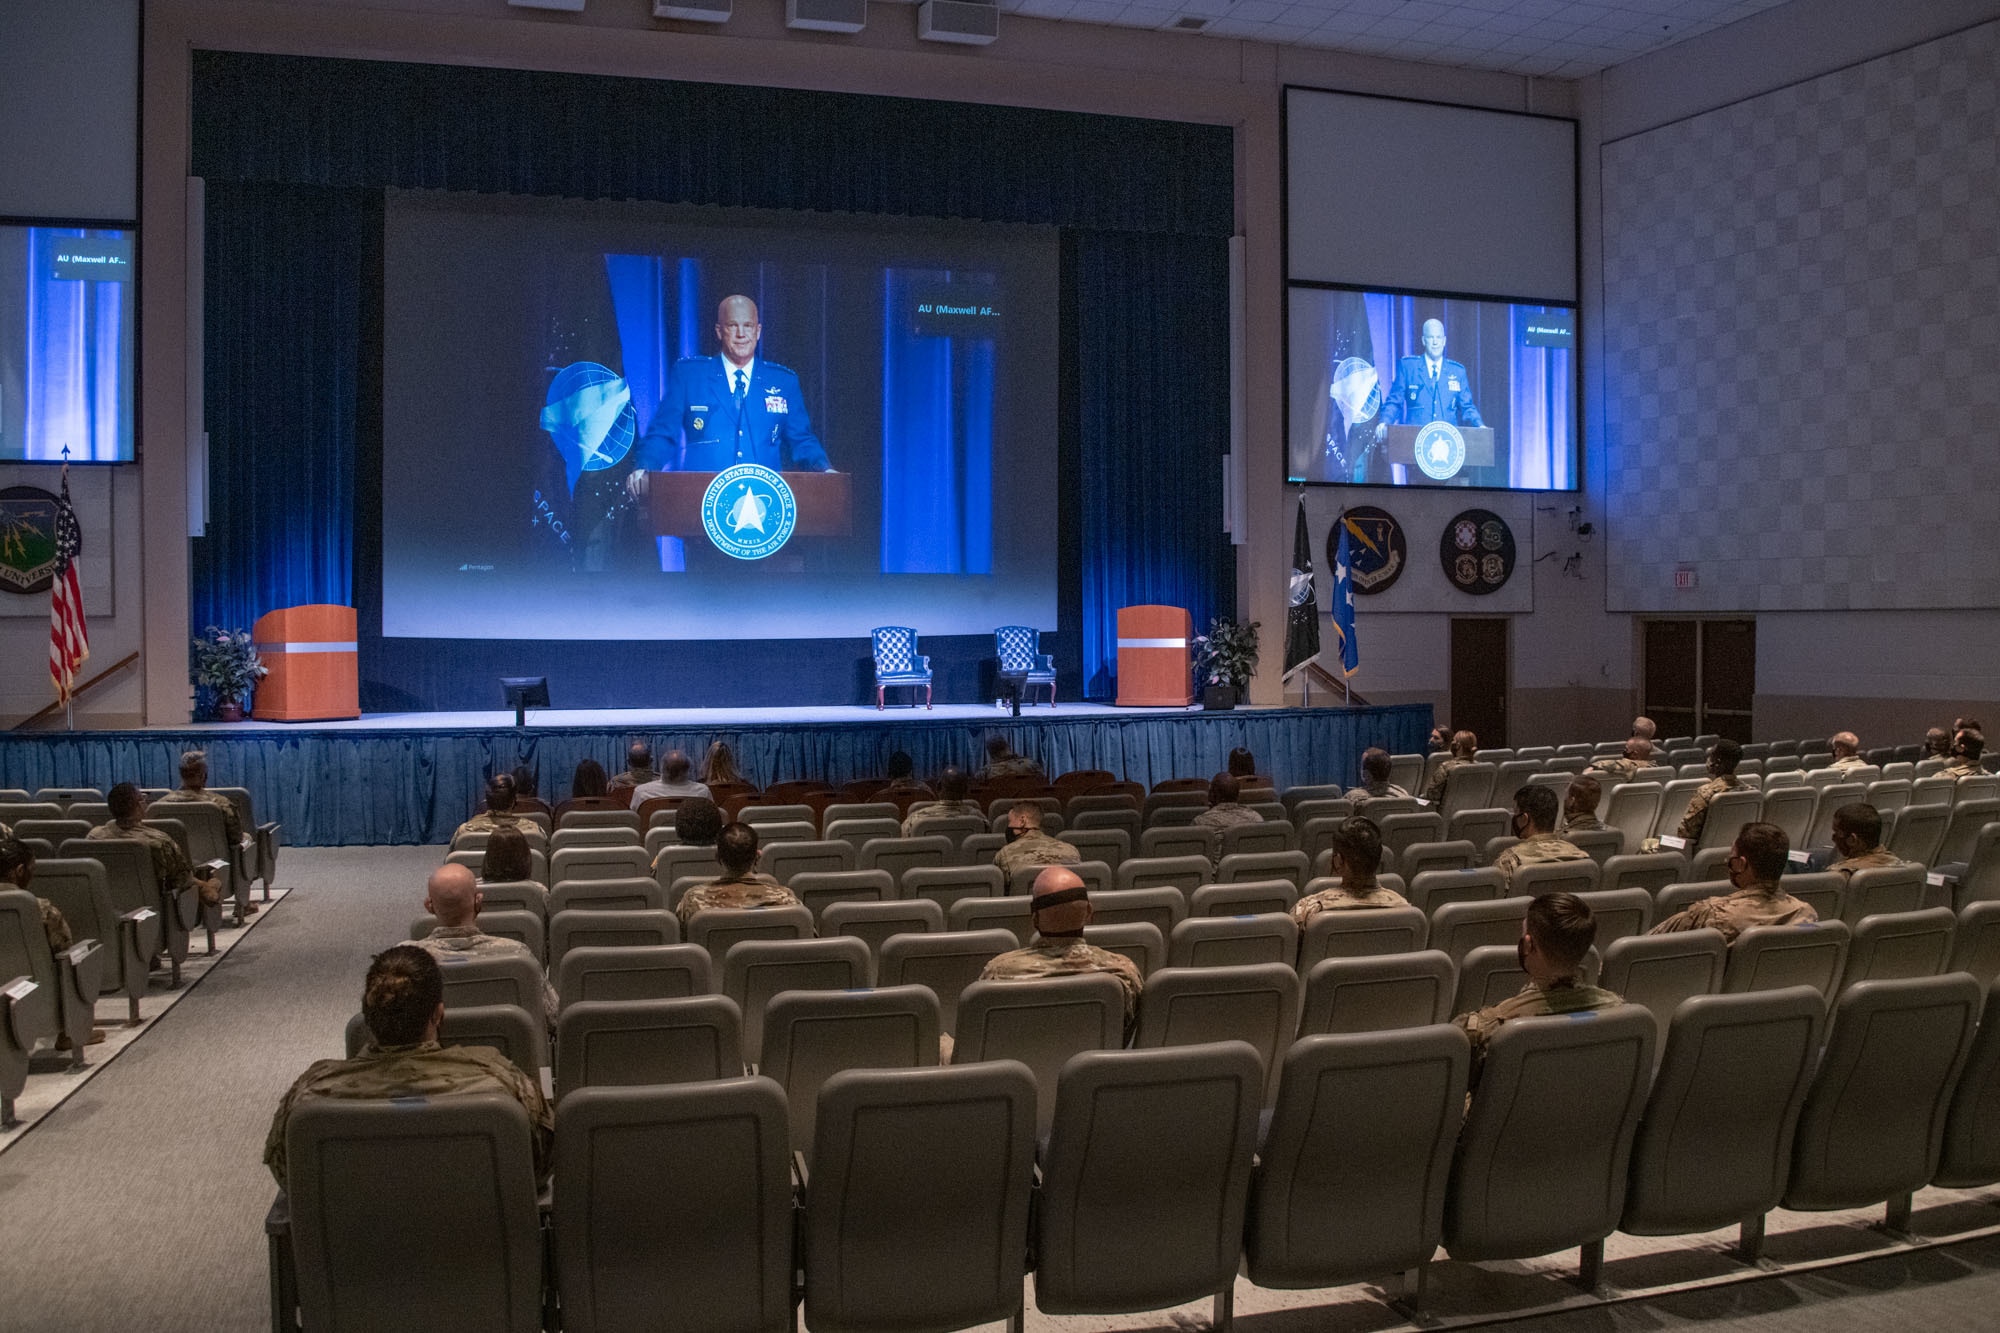 U.S. Space Force Chief of Space Operations Gen. John W. "Jay" Raymond addresses attendees of the Air Force Association's 2020 Virtual Air, Space and Cyber Conference, Sept. 15, 2020. Following his presentation, the general administered a ceremonial oath to more than 300 officers and enlisted transferring to the Space Force stationed around the world, to include 18 from Maxwell-Gunter Air Force Base, Alabama. (U.S. Air Force photo by Trey Ward)